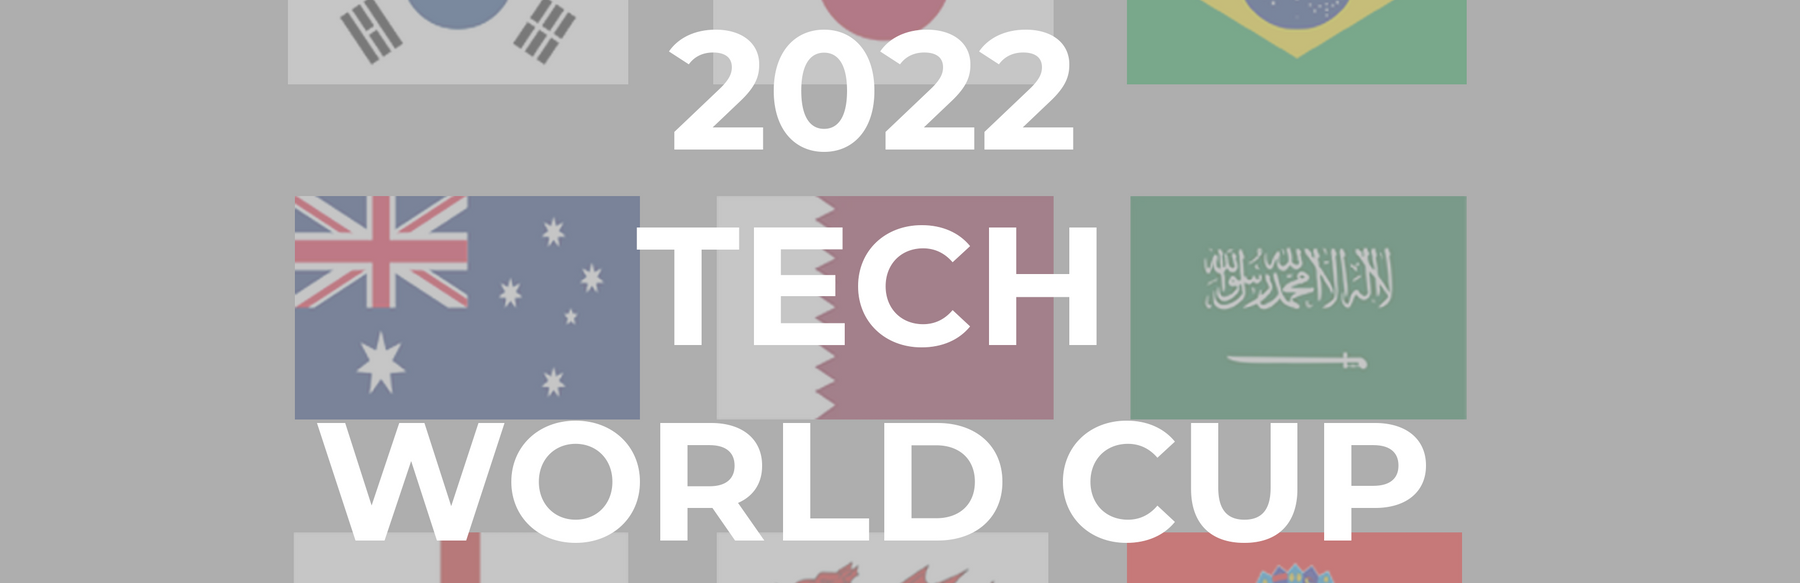 The 2022 Tech World Cup.